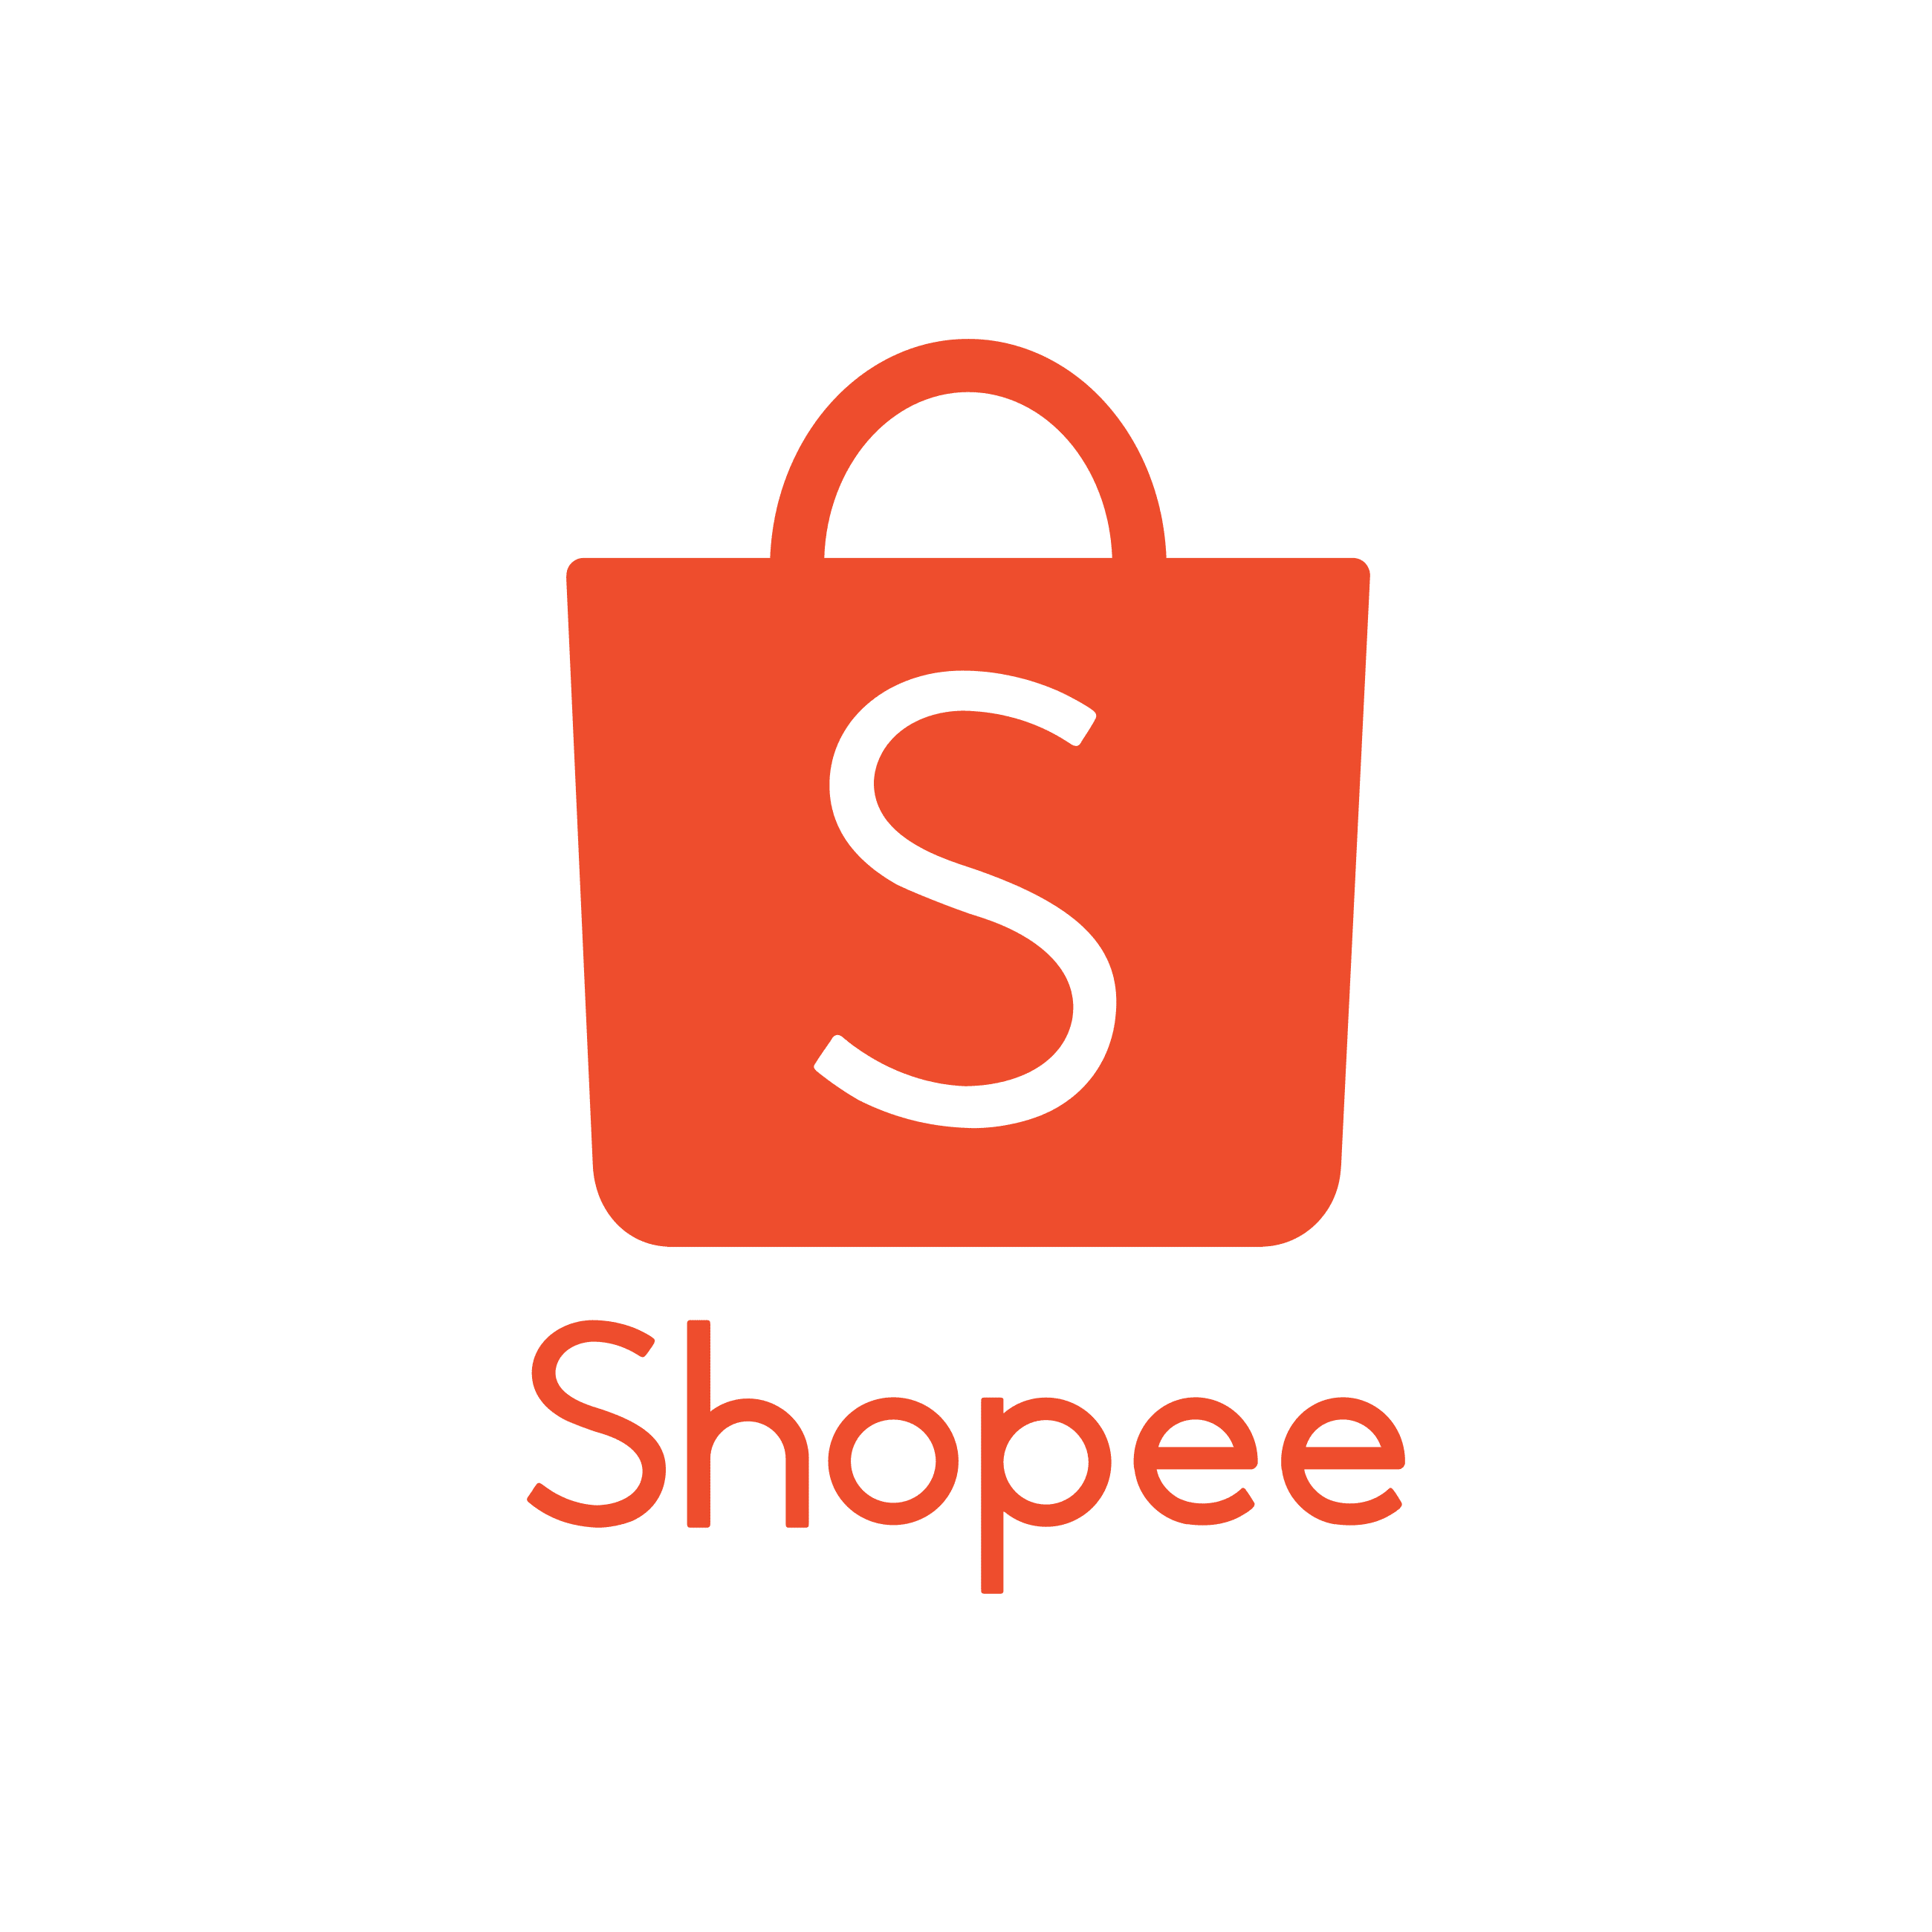 buy now at shopee